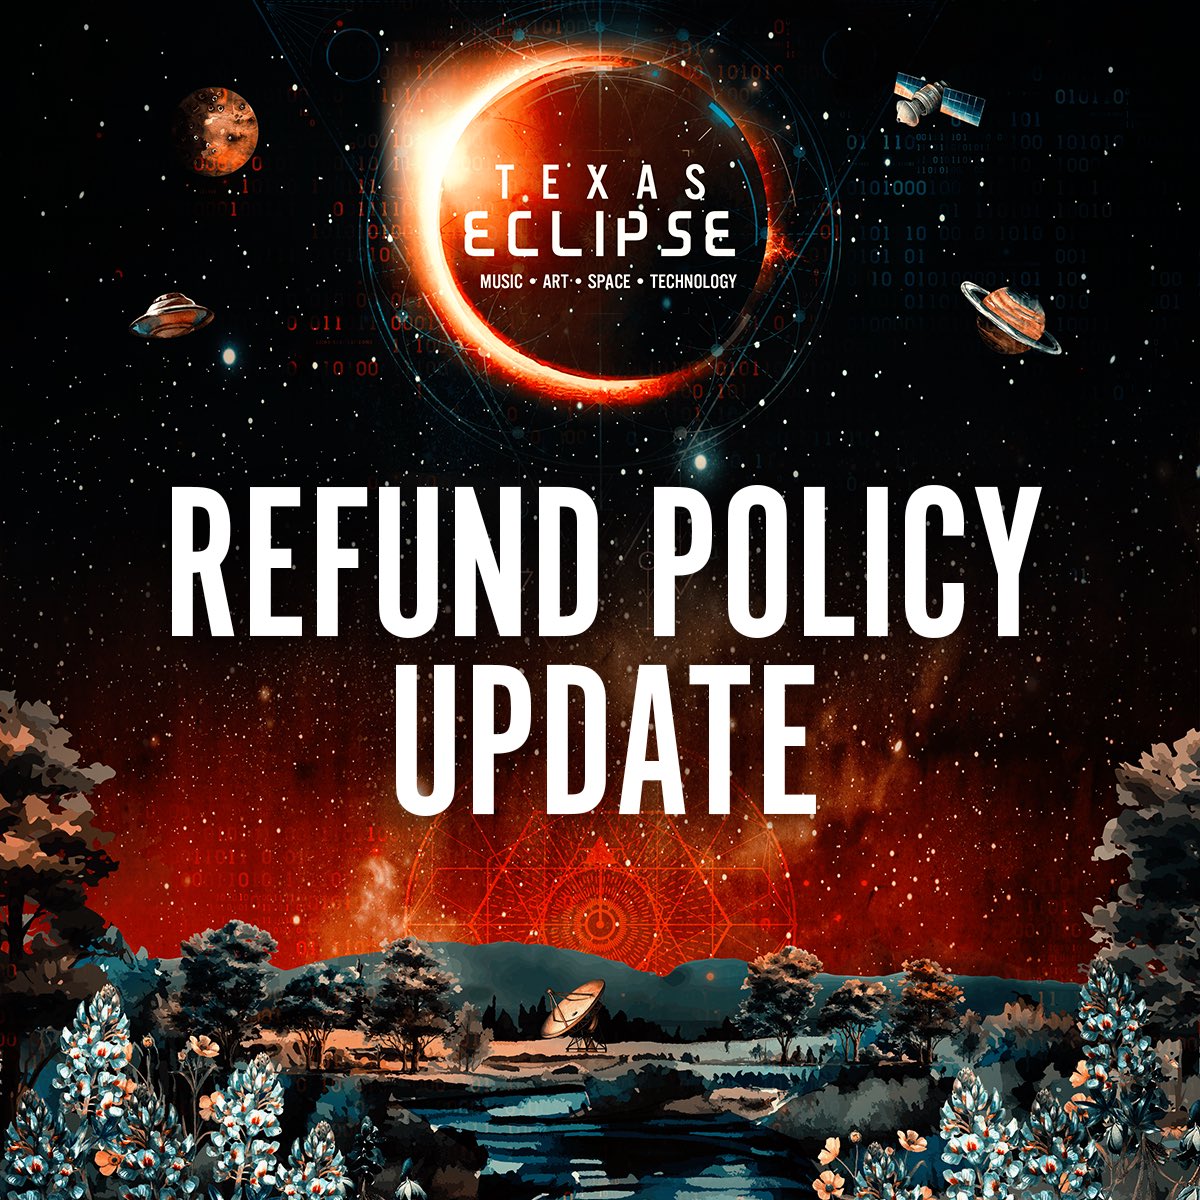 Thank you for your patience as we have developed the following refund policy, given the weather cancellation of the final day at Texas Eclipse. Read it here: hive.co/l/refundupdate